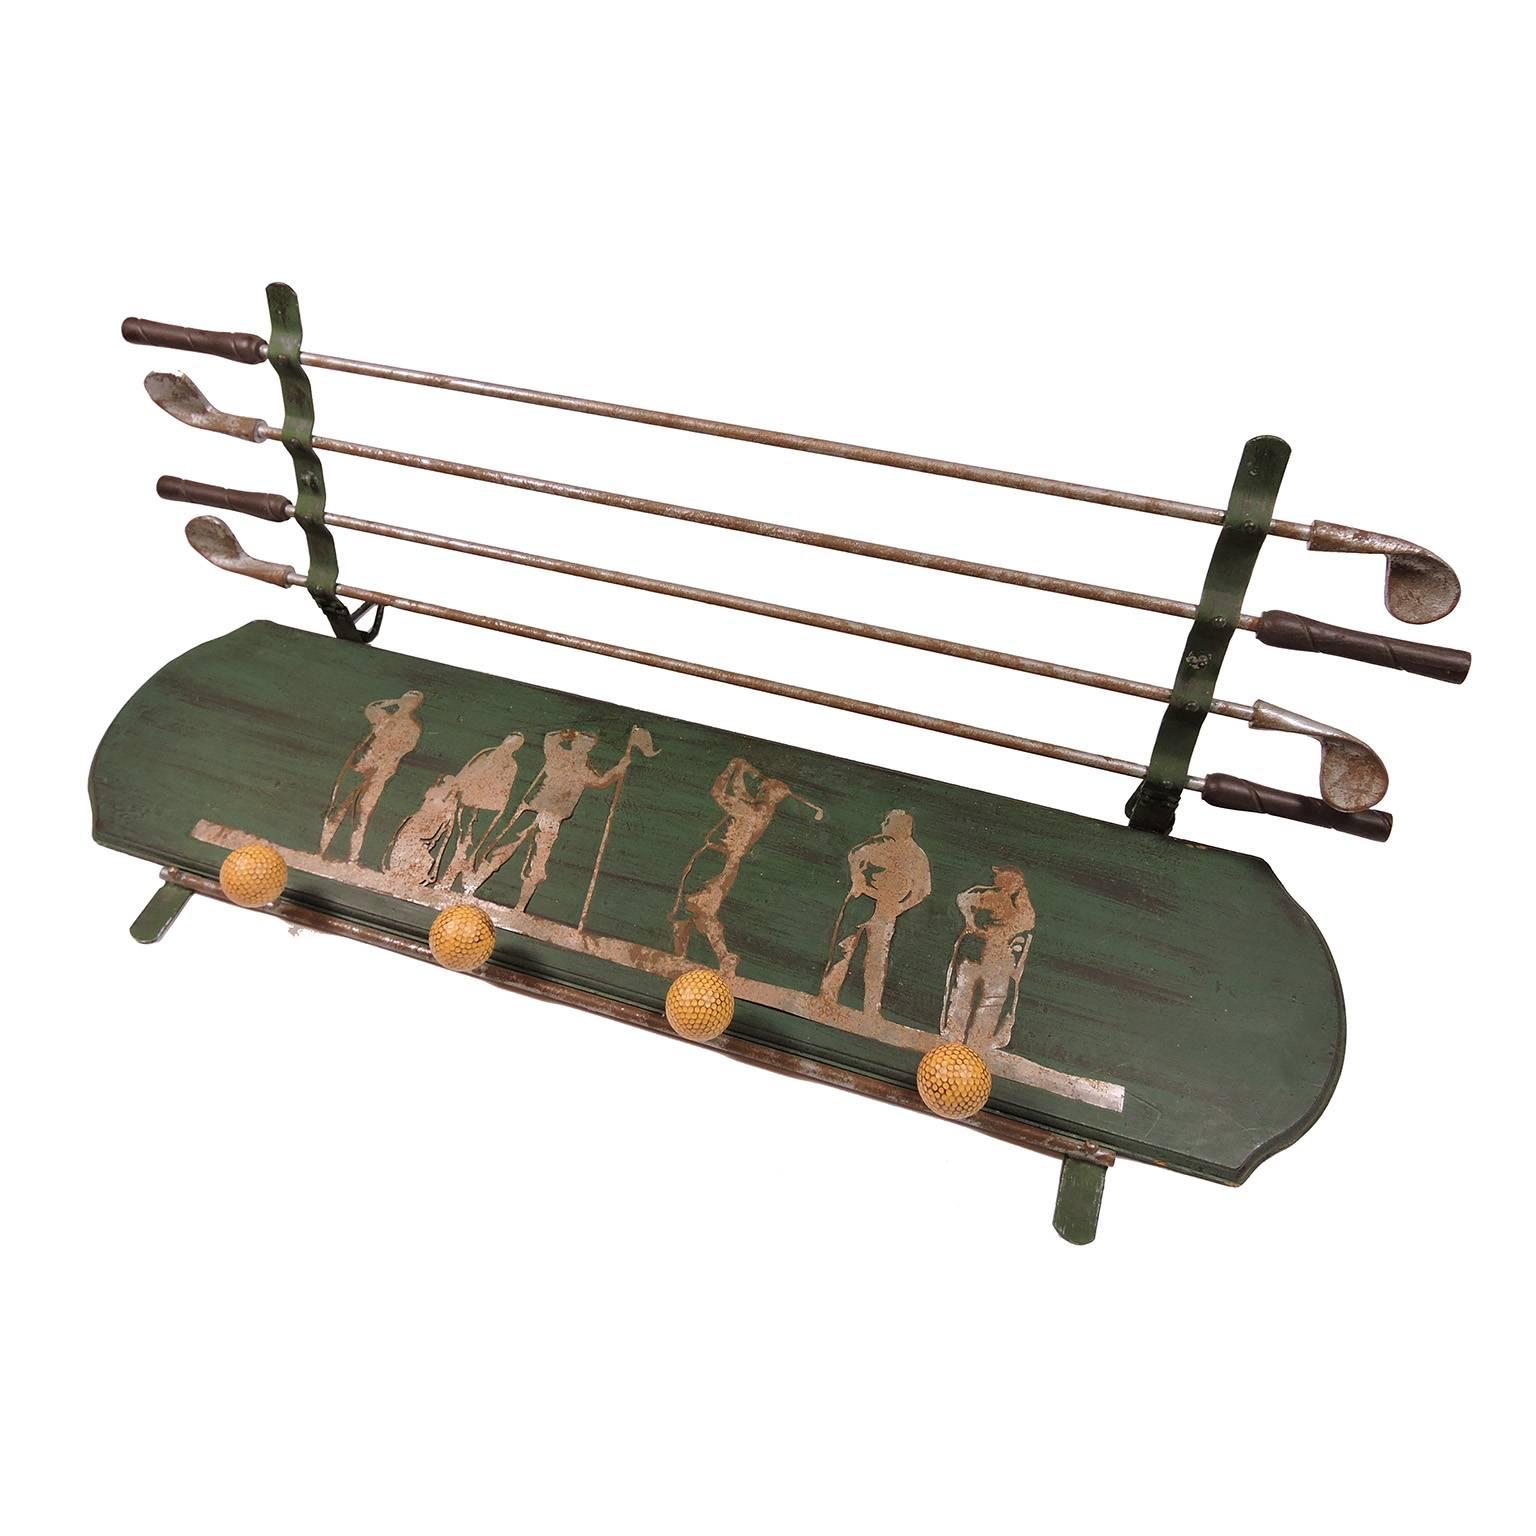 Unusual vintage green and silver painted Golfer's hanging wall coat rack, mid-20th century; comprised of silver painted Silhouette figures playing golf behind four horizontal golf clubs that lift up with four golf ball hooks below. Measures: